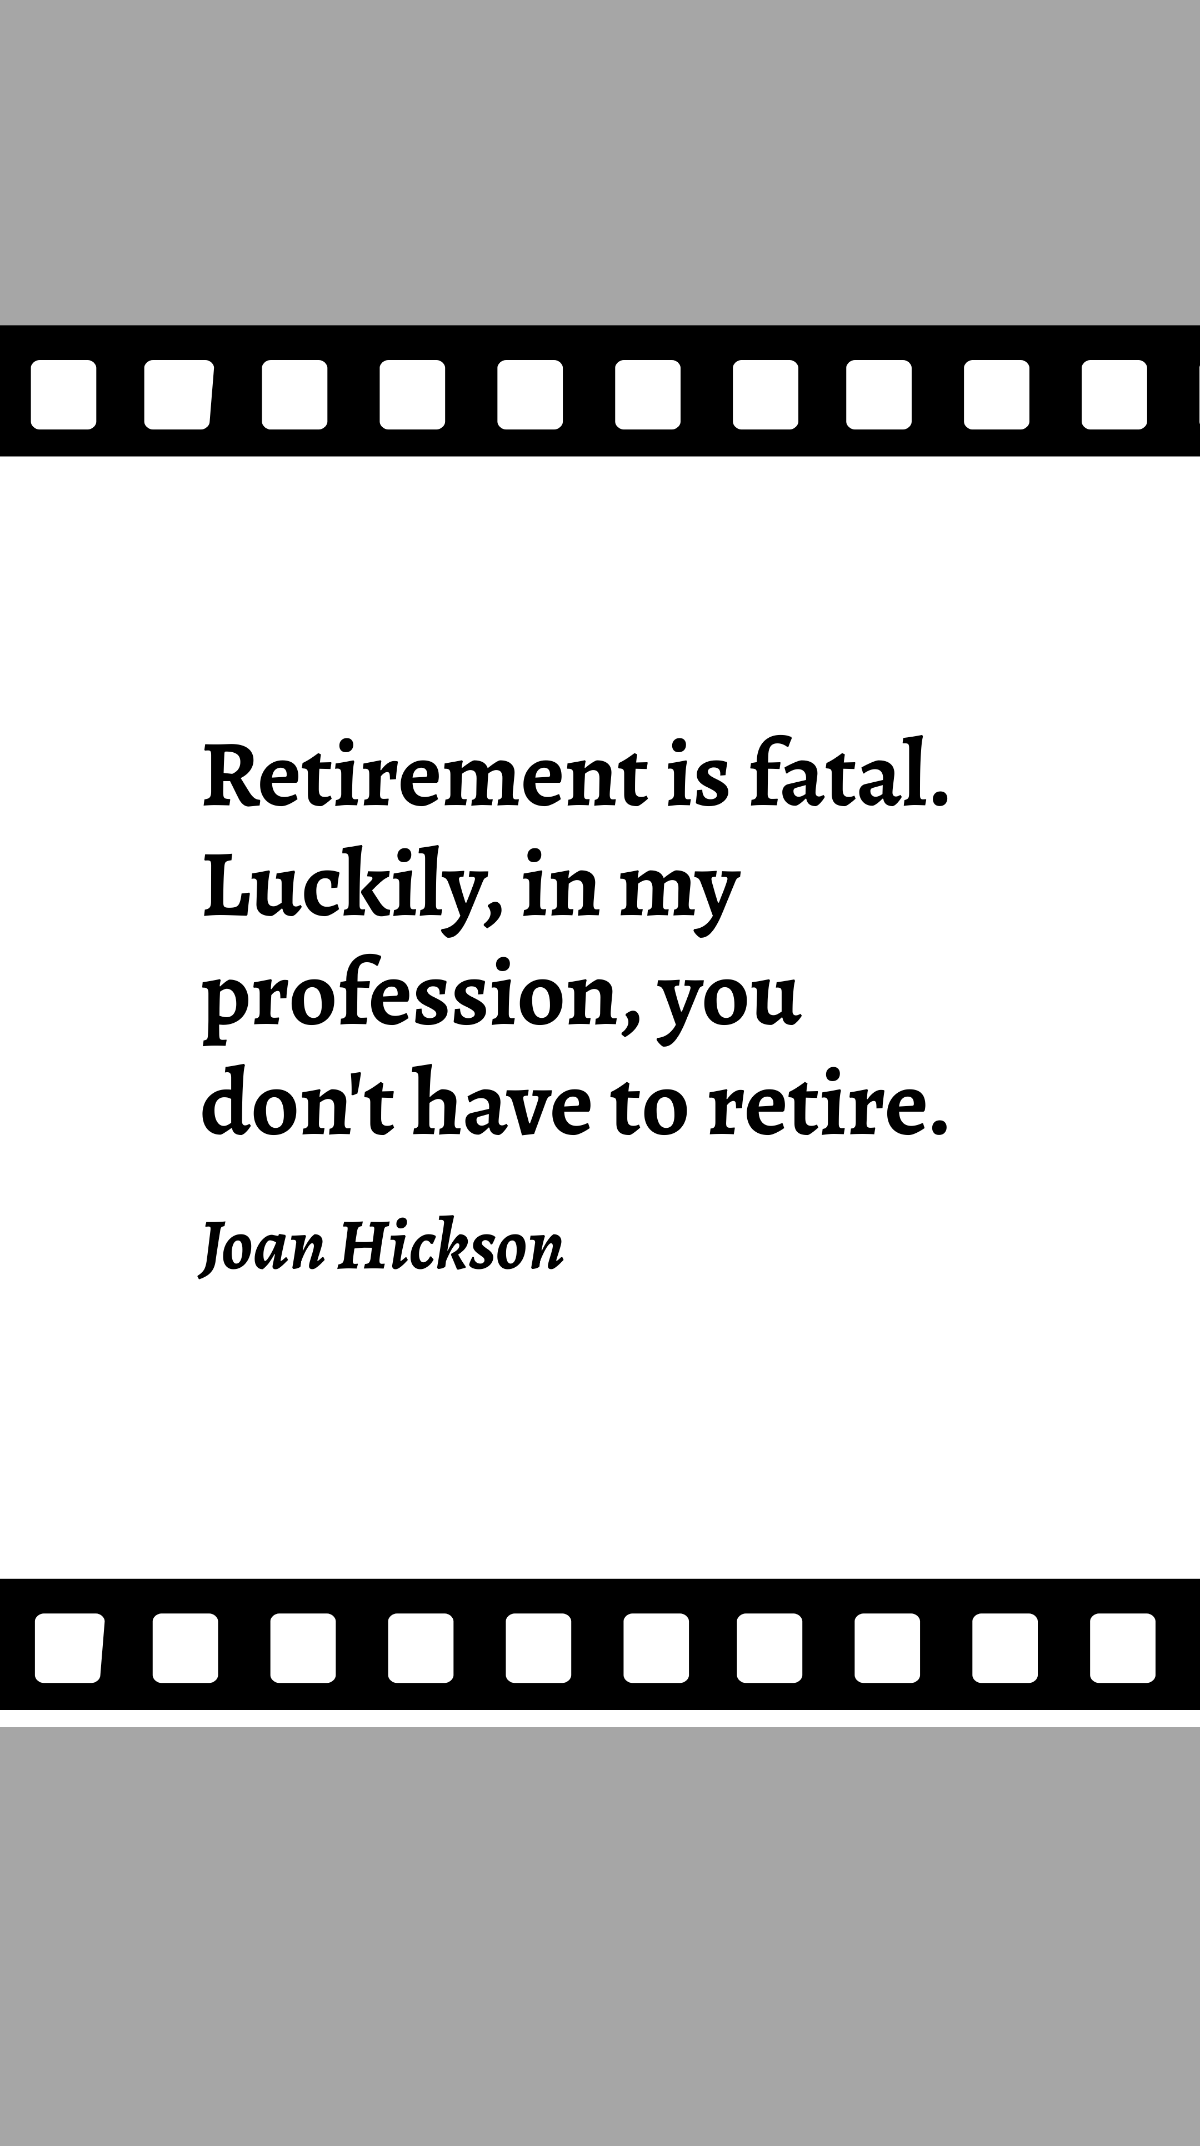 Free Joan Hickson - Retirement is fatal. Luckily, in my profession, you don't have to retire. Template